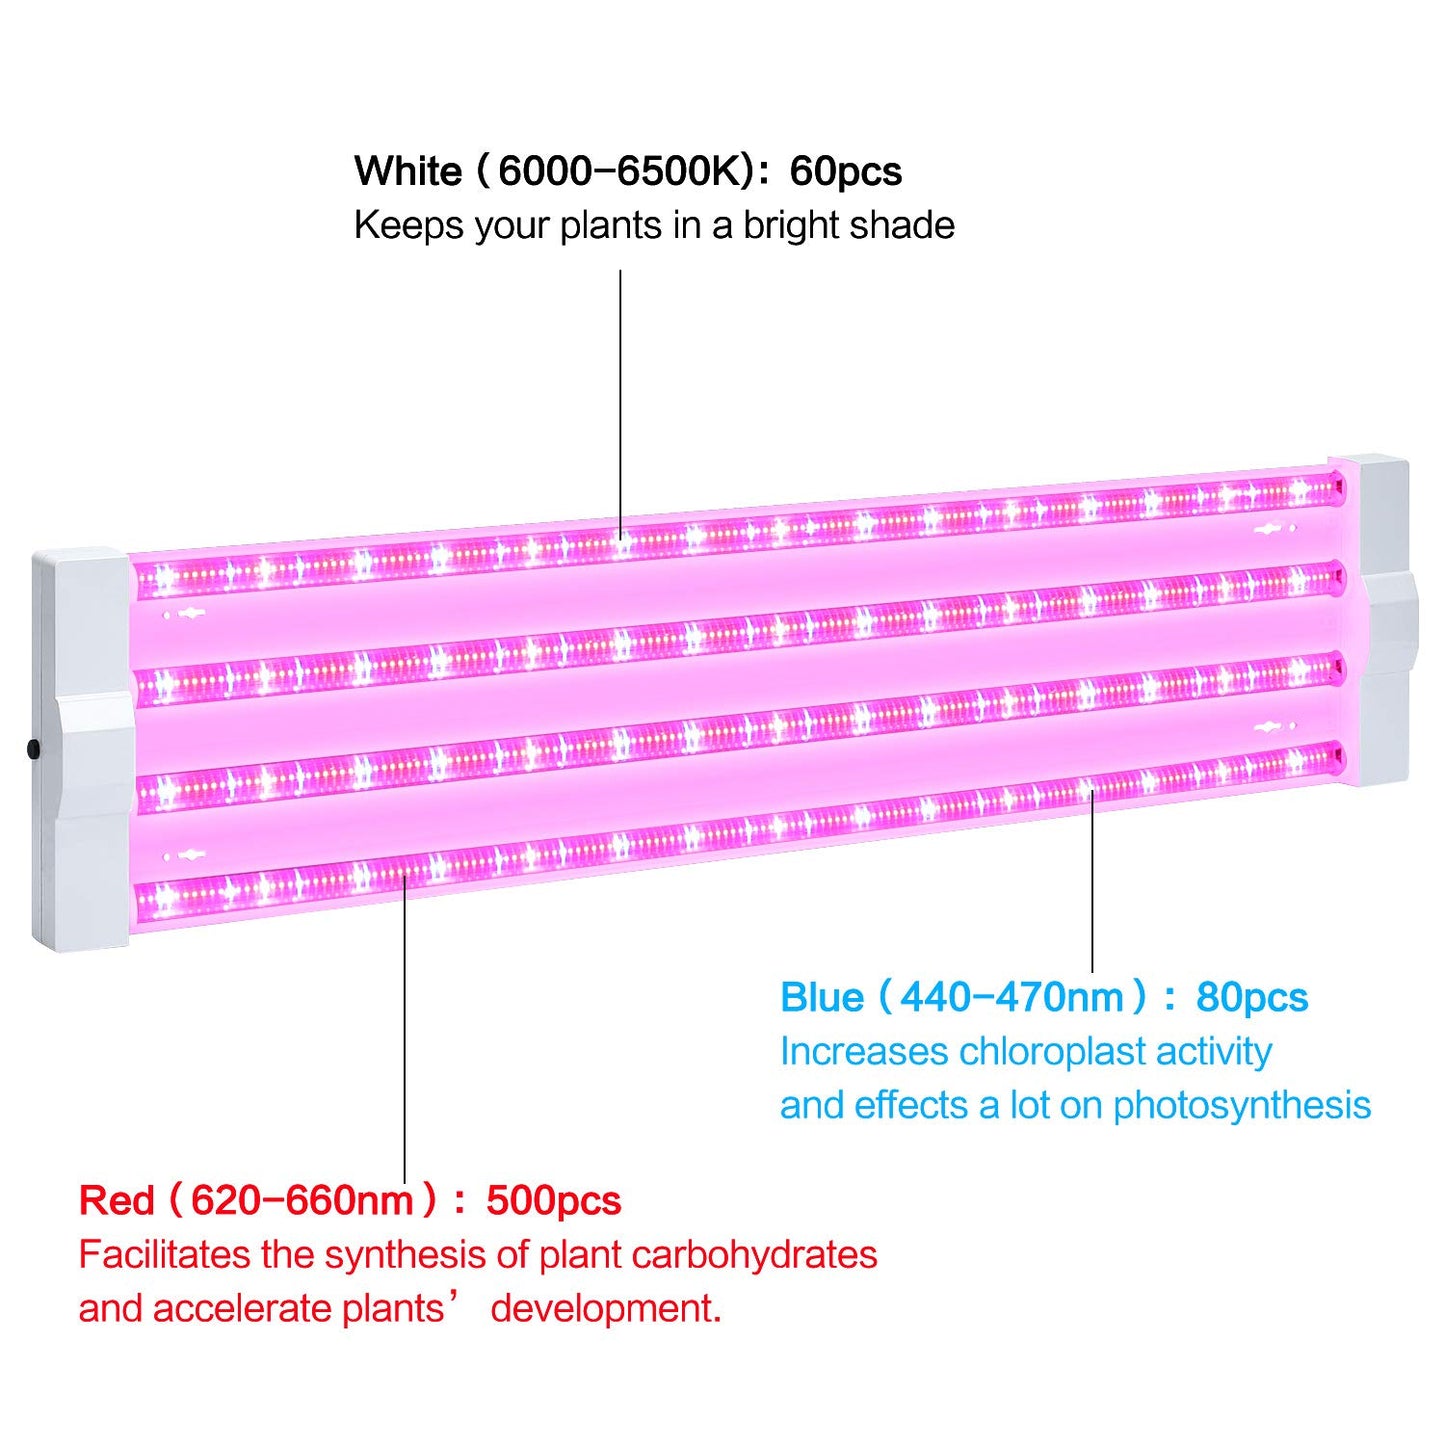 AntLux 4ft LED Grow Light 80W (600W Equivalent) Full Spectrum Integrated Growing Lamp Fixture for Greenhouse Hydroponic Indoor Plant Seedling Veg and Flower, Plug in with on/Off Switch